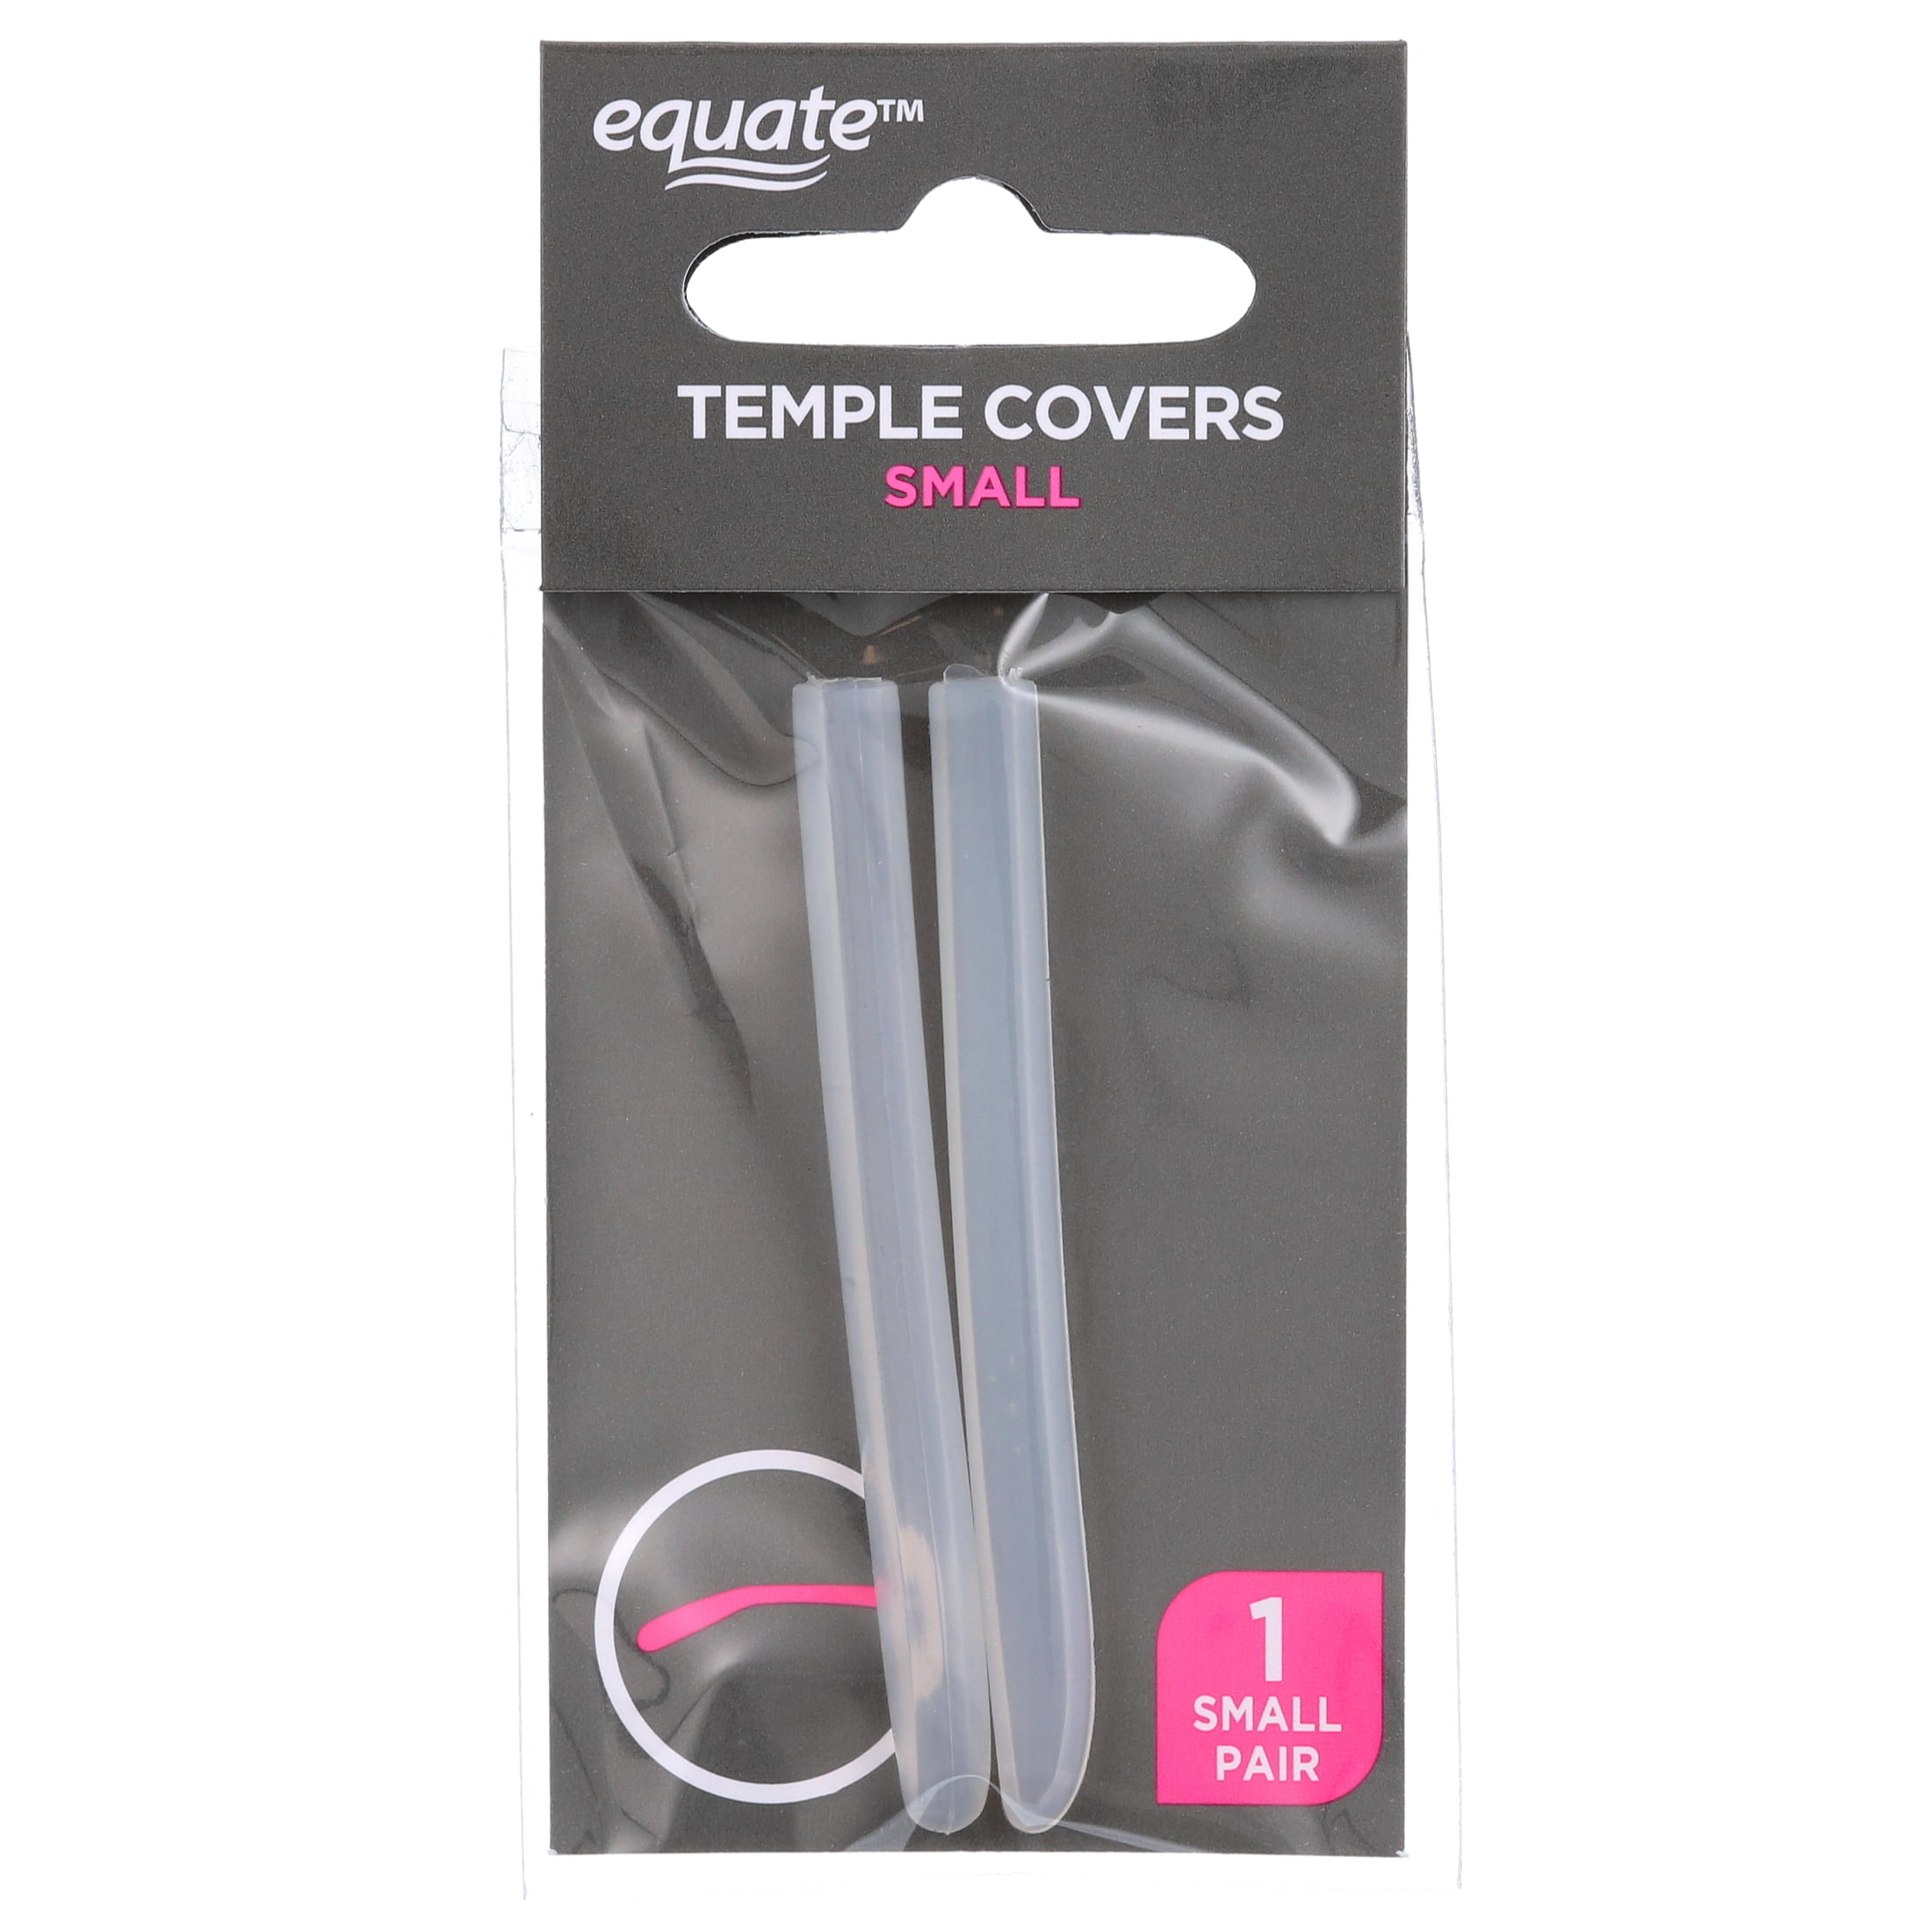 A package of Equate brand small temple covers for eyeglasses